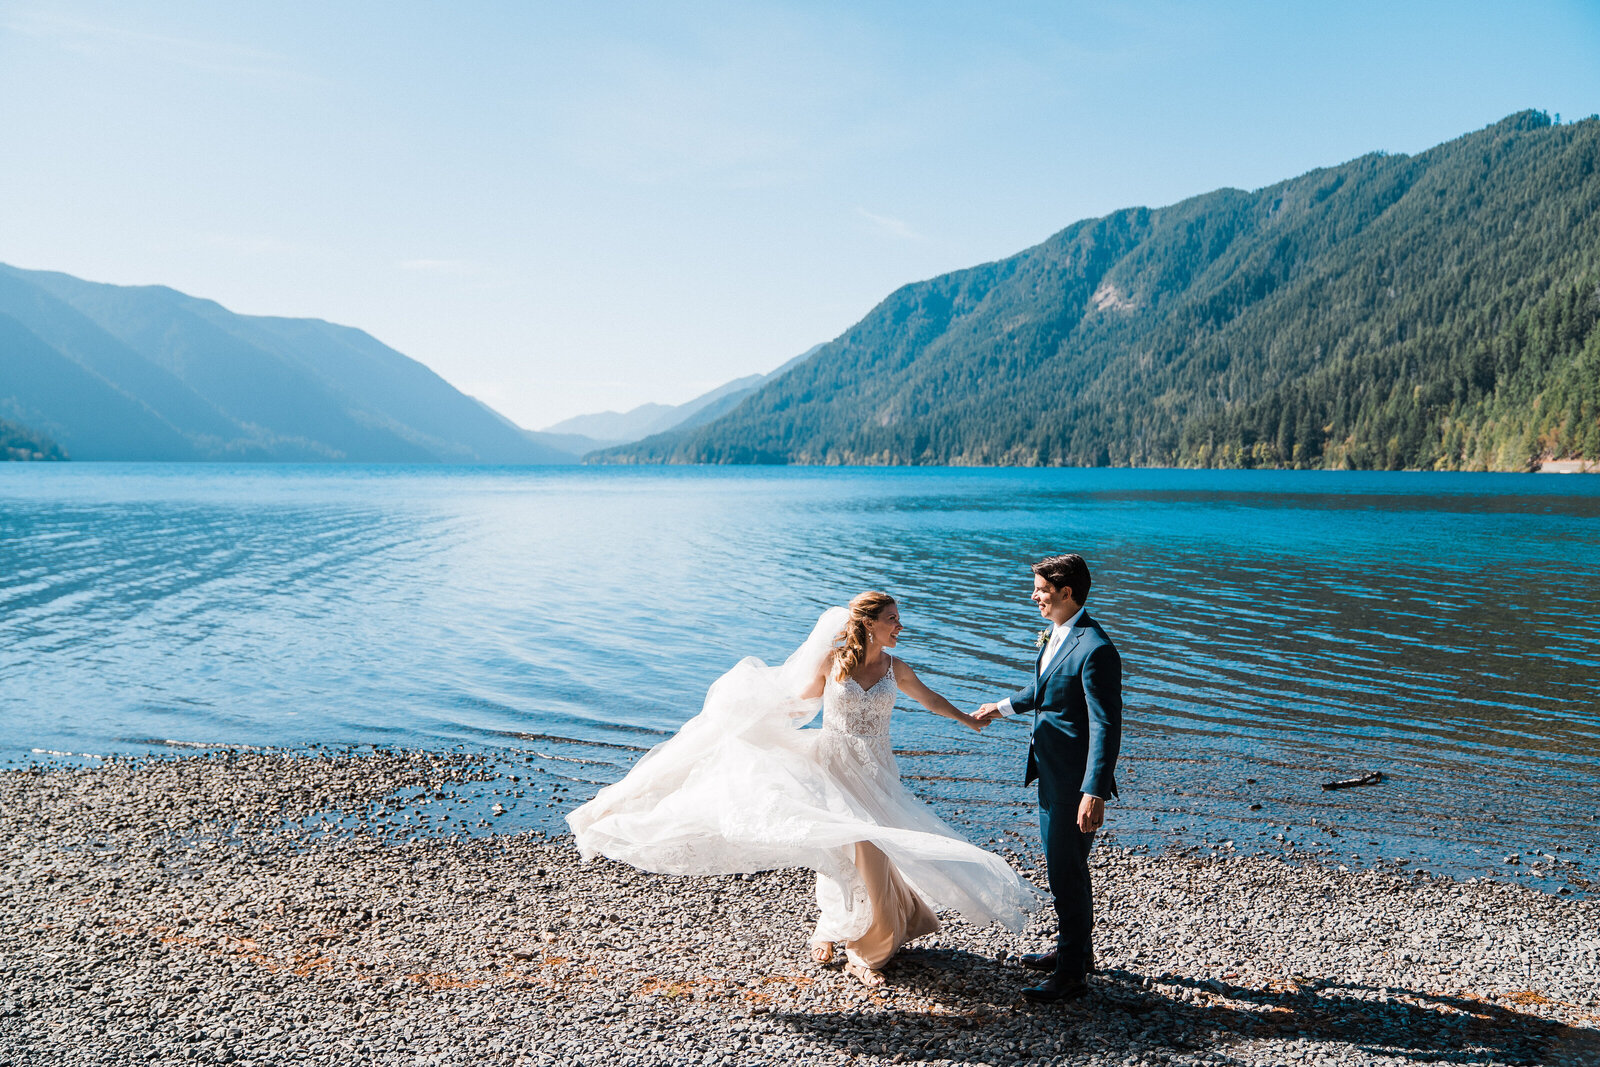 A groom twirls his bride along the shores of Lake Crescent in Olympic National Park on a bright sunny day photographed by PNW elopement photographer Amy Galbraith